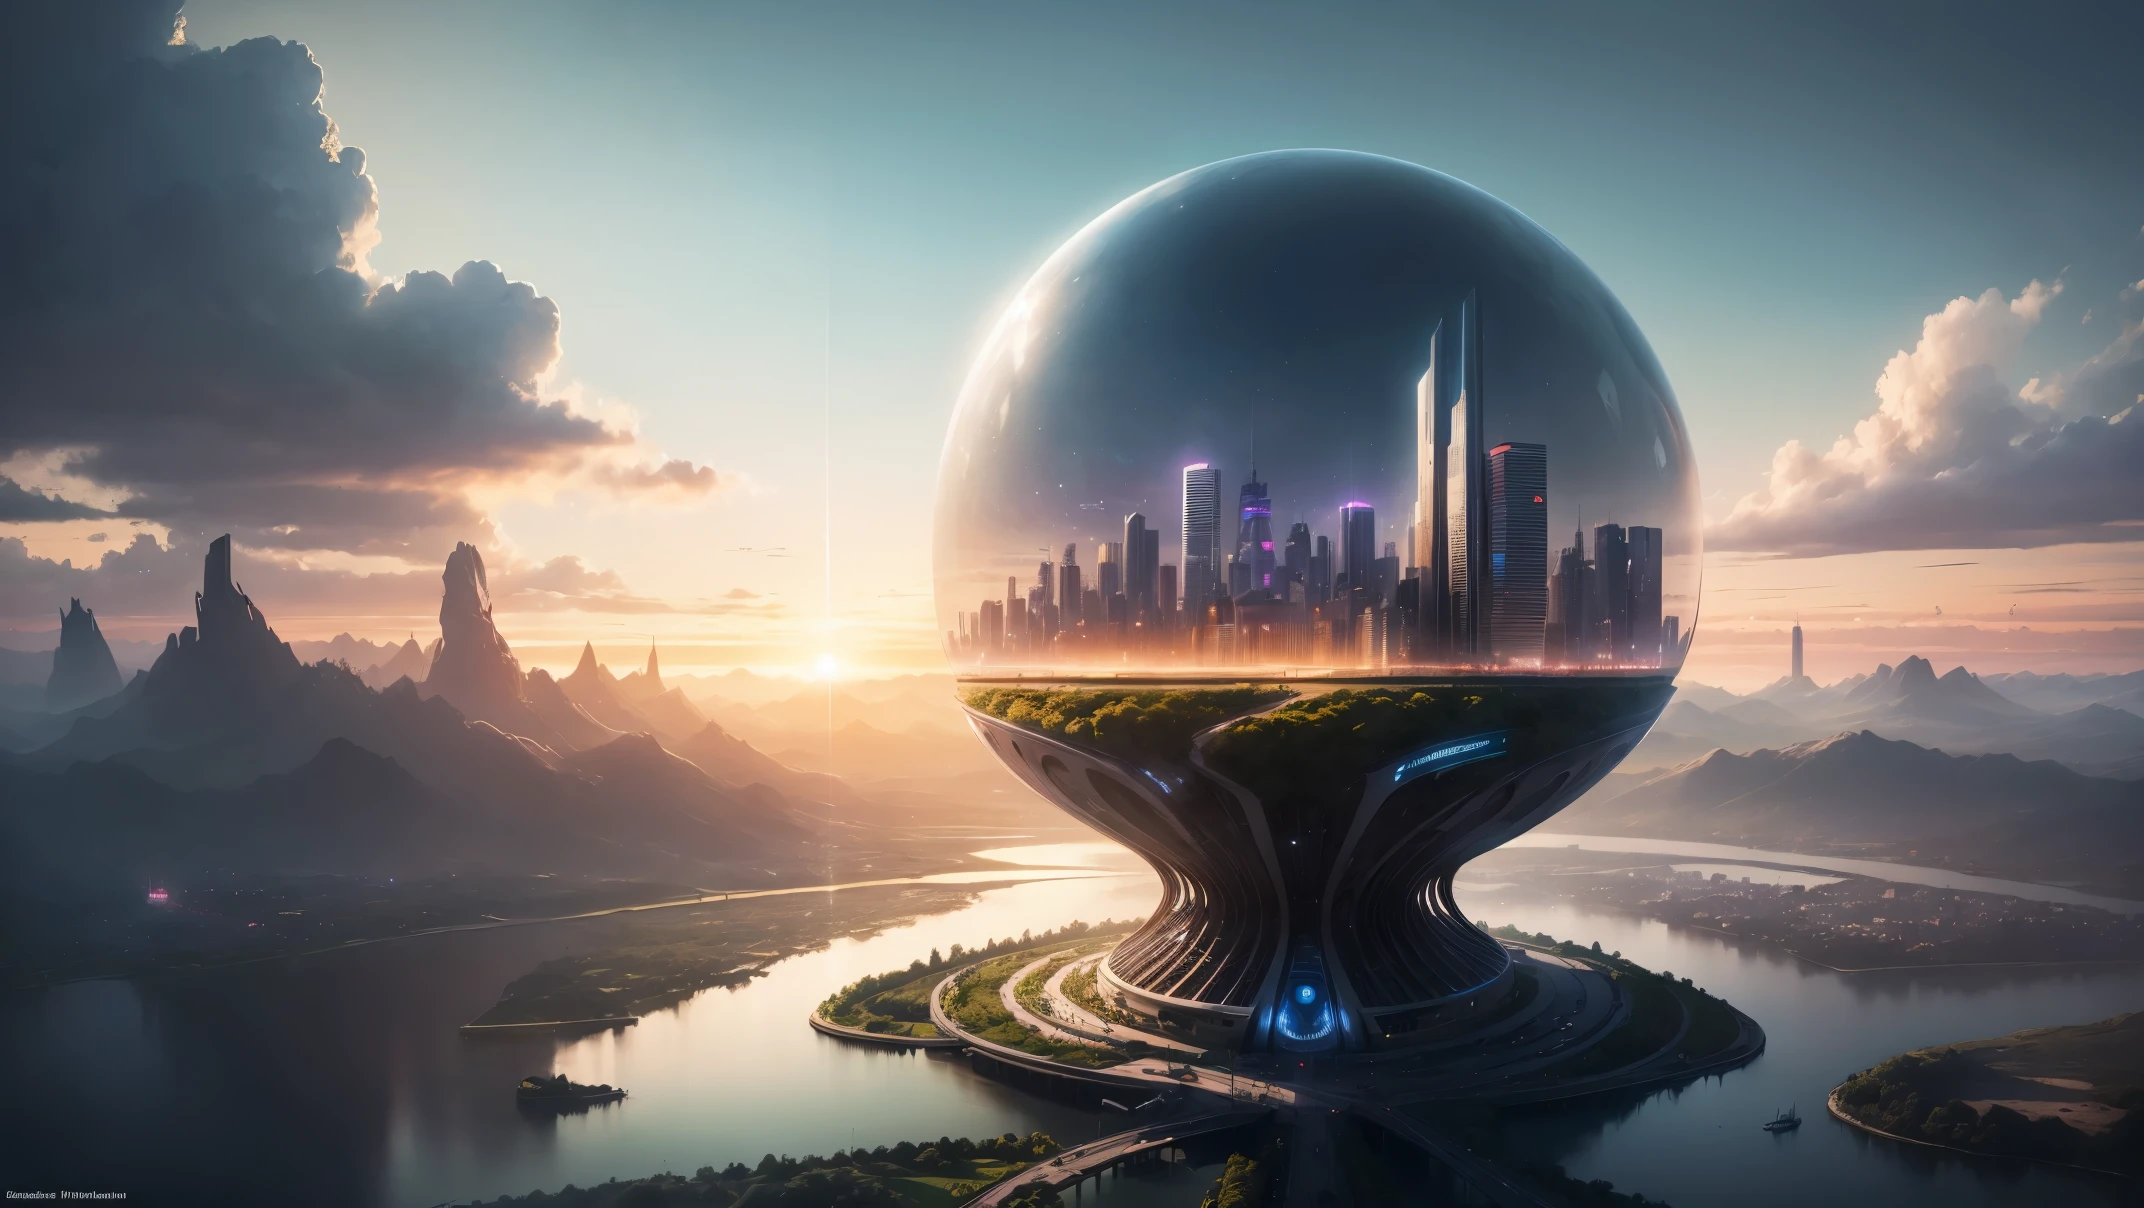 (Best quality,4K,8K,A high resolution,Masterpiece:1.2),Ultra-detailed,(Realistic,Photorealistic,photo-realistic:1.37),Futuristic floating sky city,Futuristic technology,Huge urban high-tech tablet platform,Airship,Floating in the sky,Futuristic city,Small airships around,High-tech hemispherical platform,Colorful lights,Advanced architecture,Islamic architecture,modern architecture,skyscraper,Access the cloud,Scenic beauty,view over city,Impressive design,Blend seamlessly with nature,energetic and vibrant atmosphere,Futuristic transportation system,Parking is suspended,Transparent path,Lush greenery,Sky gardens,cascading waterfalls,Magnificent skyline,reflections on the water,Sparkling river,Architectural innovation,futuristic skyscrapers,Transparent dome,The shape of the building is unusual,Elevated walkway,Impressive skyline,Glowing lights,Futuristic technology,Minimalist design,Scenic spots,Panoramic view,Cloud Piercing Tower,Vibrant colors,epic sunrise,epic sunset,Dazzling light display,magical ambiance,The future city,Urban Utopia,LuxuryLifestyle,Innovative energy,sustainable development,Smart city technology,Advanced infrastructure,Tranquil atmosphere,Nature and technology live in harmony,Awesome cityscape,Unprecedented urban planning,Architecture connects seamlessly with nature,High-tech metropolis,A cutting-edge engineering marvel,The future of urban living,Visionary architectural concept,Energy-efficient buildings,Harmony with the environment,A city floating above the clouds,Utopian dreams become reality,The possibilities are endless,State-of-the-art transportation network,Green energy integration,Innovative materials,Impressive holographic display,Advanced communication system,Breathtaking aerial view,Quiet and peaceful environment,Modernist aesthetics,Ethereal beauty